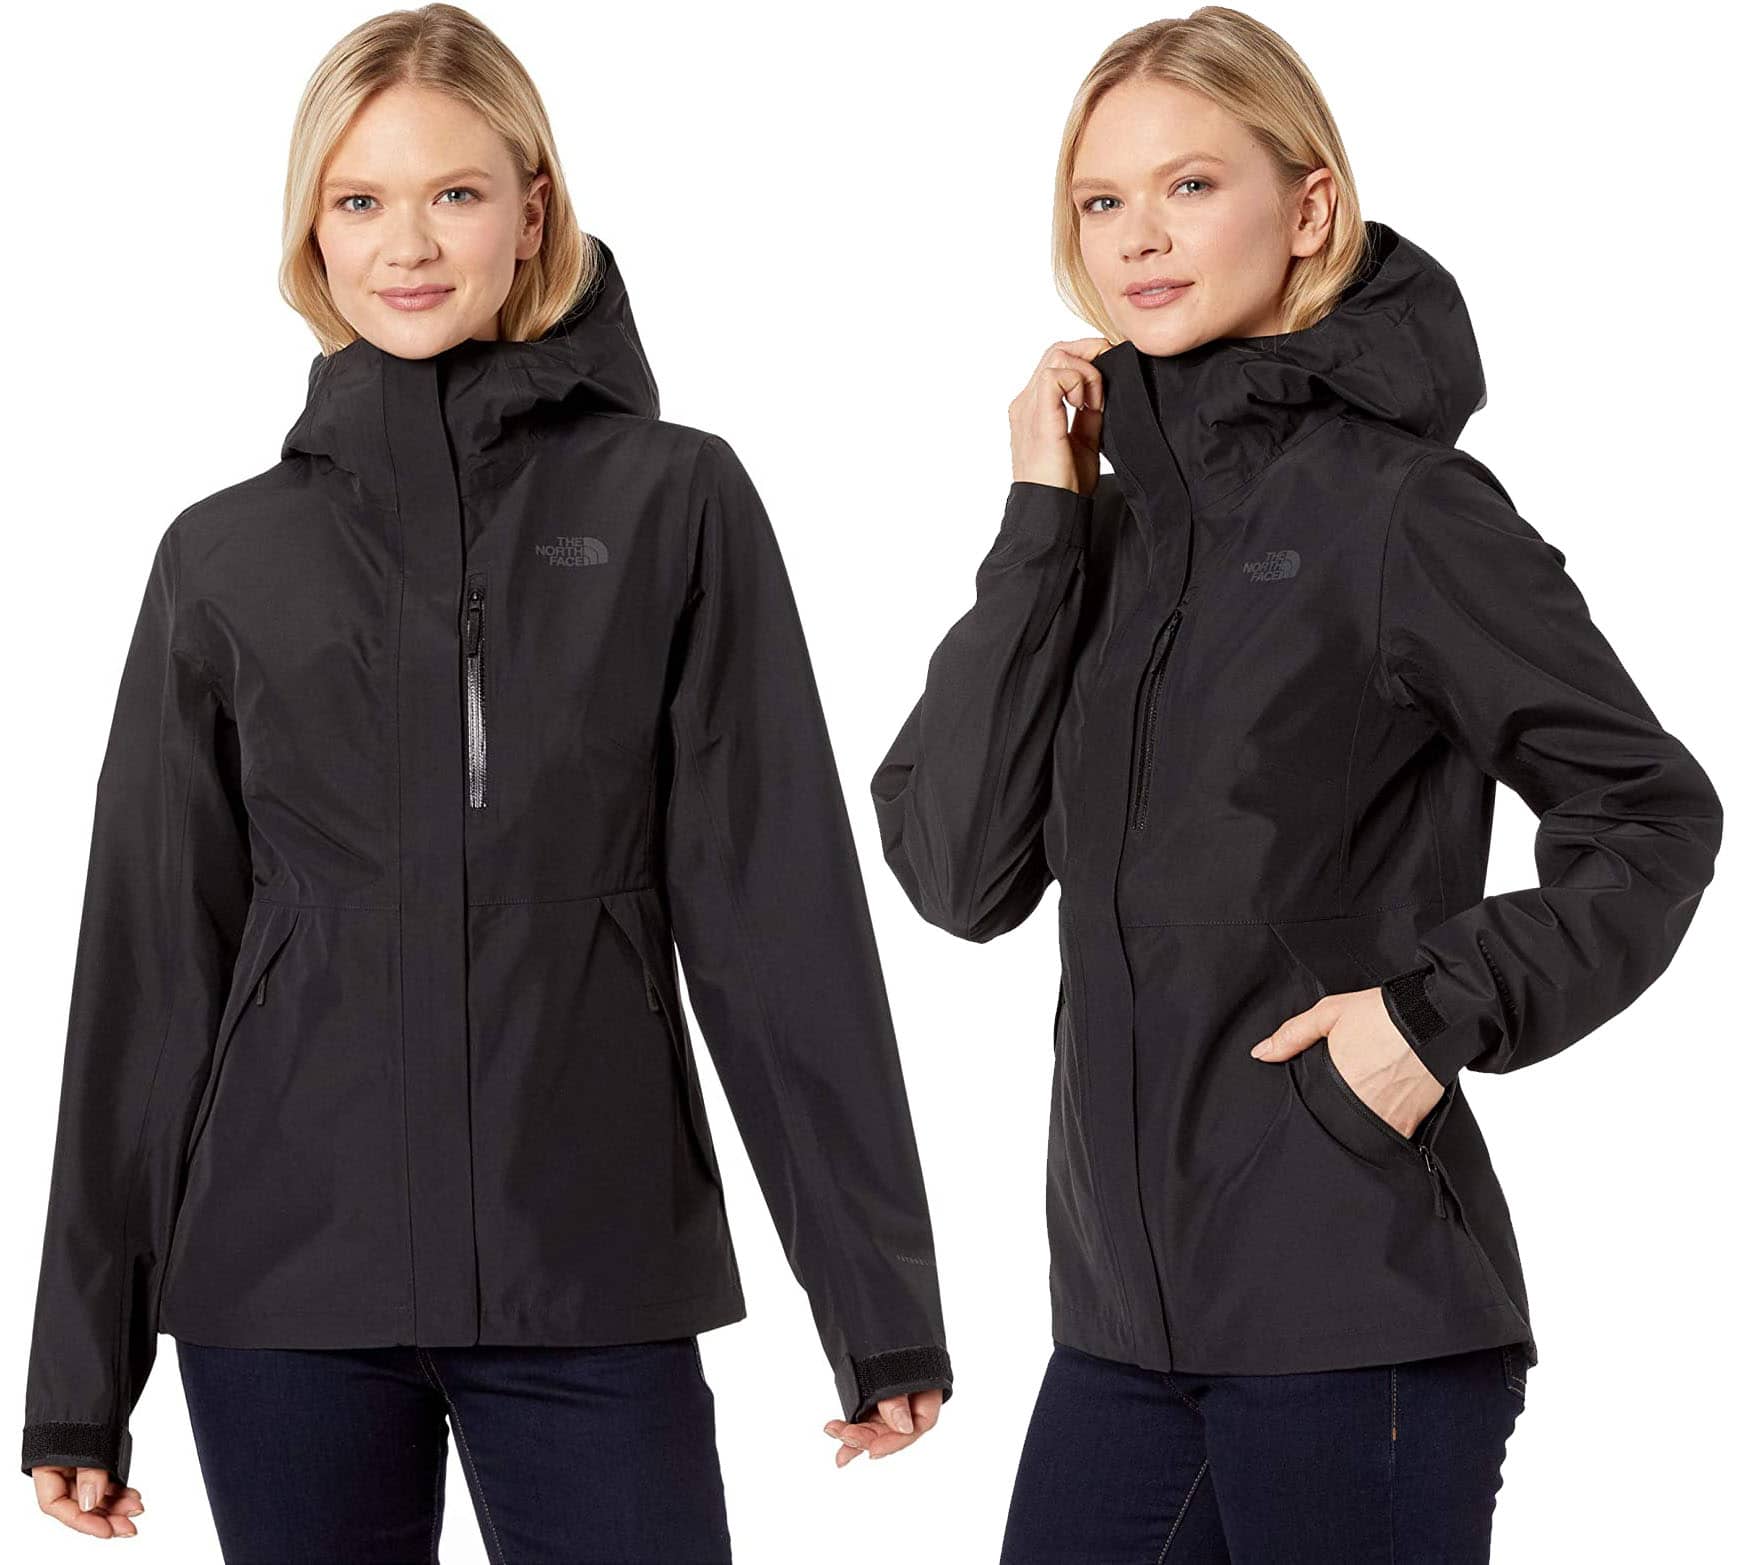 The North Face Dryzzle Futurelight jacket is ideal for active adventures no matter the weather